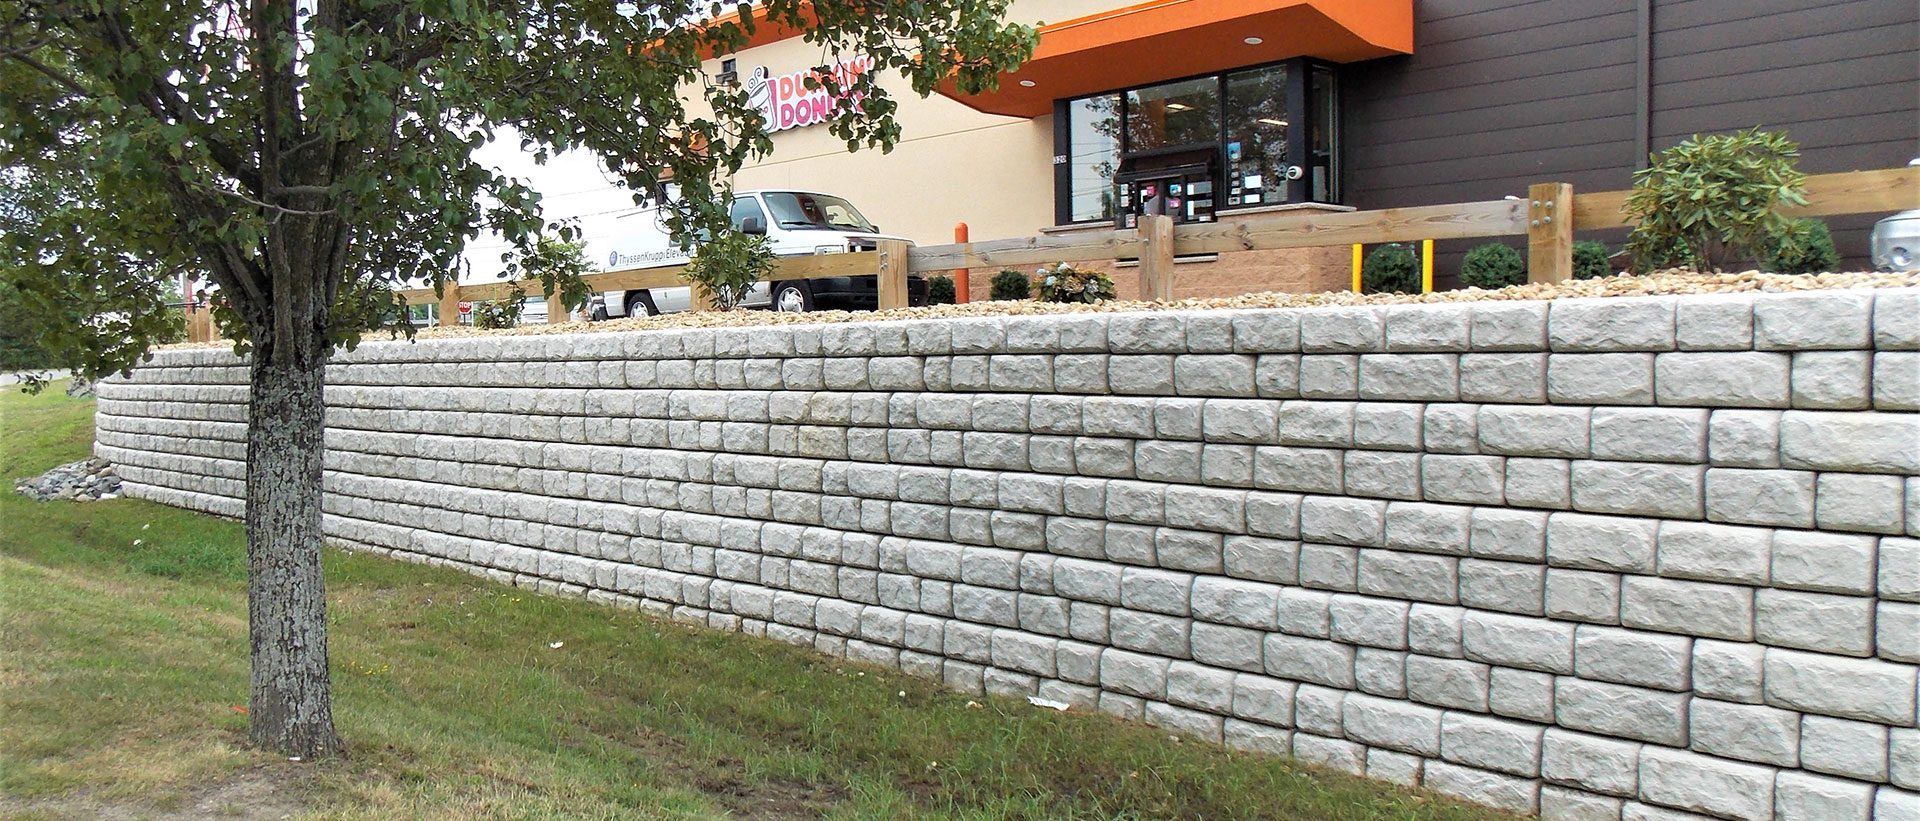 Redi-Rock Retaining wall at a Dunkin Donuts Drive-through